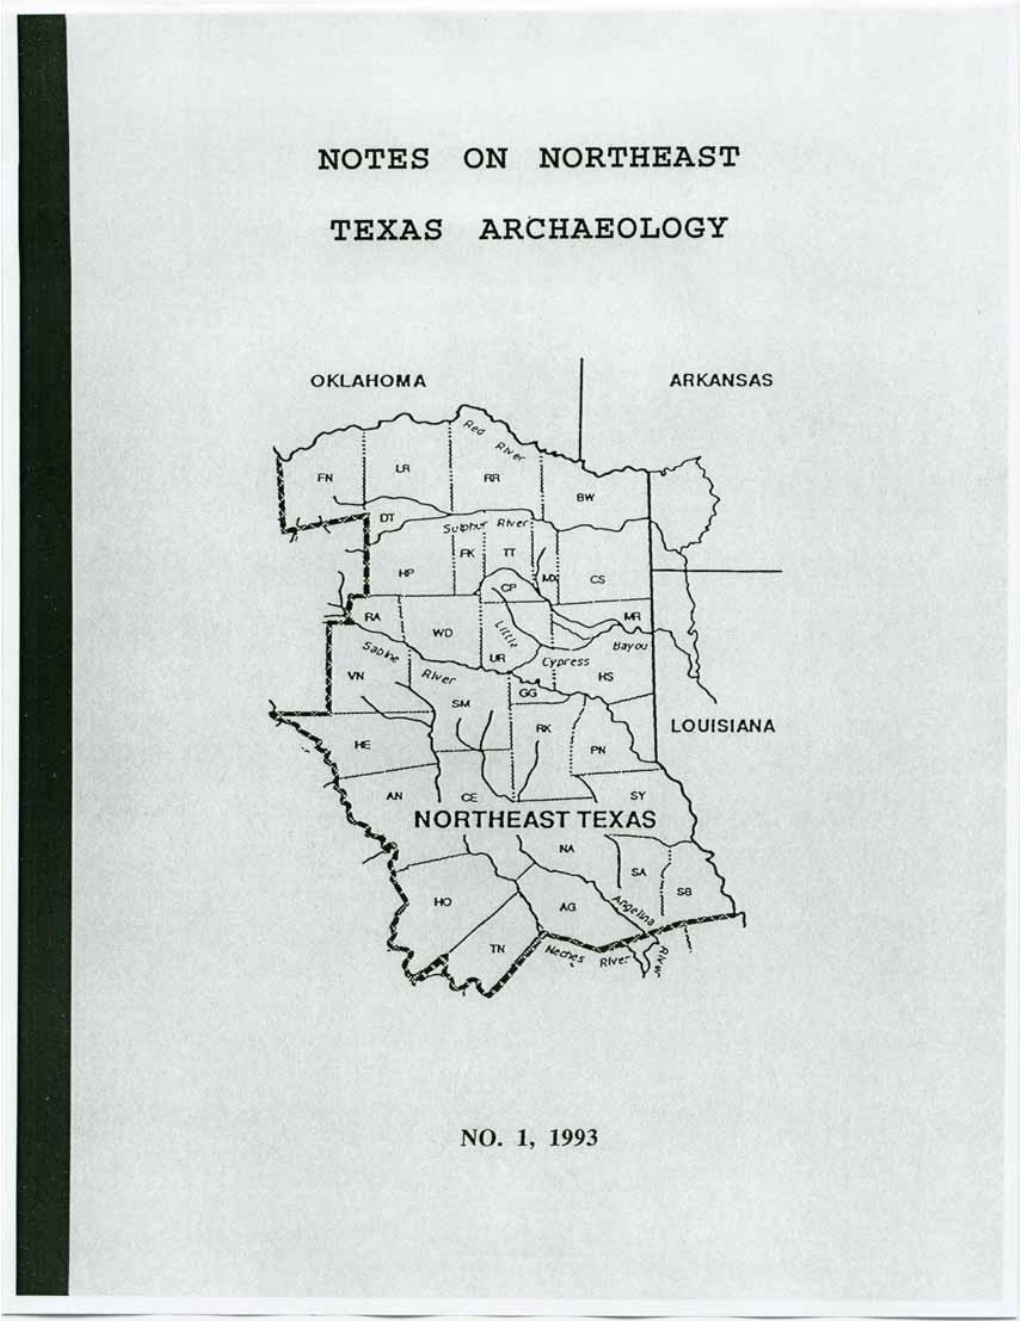 Notes on Northeast Texas Archaeology, No.1 (1993) I EDITORIALBOARD